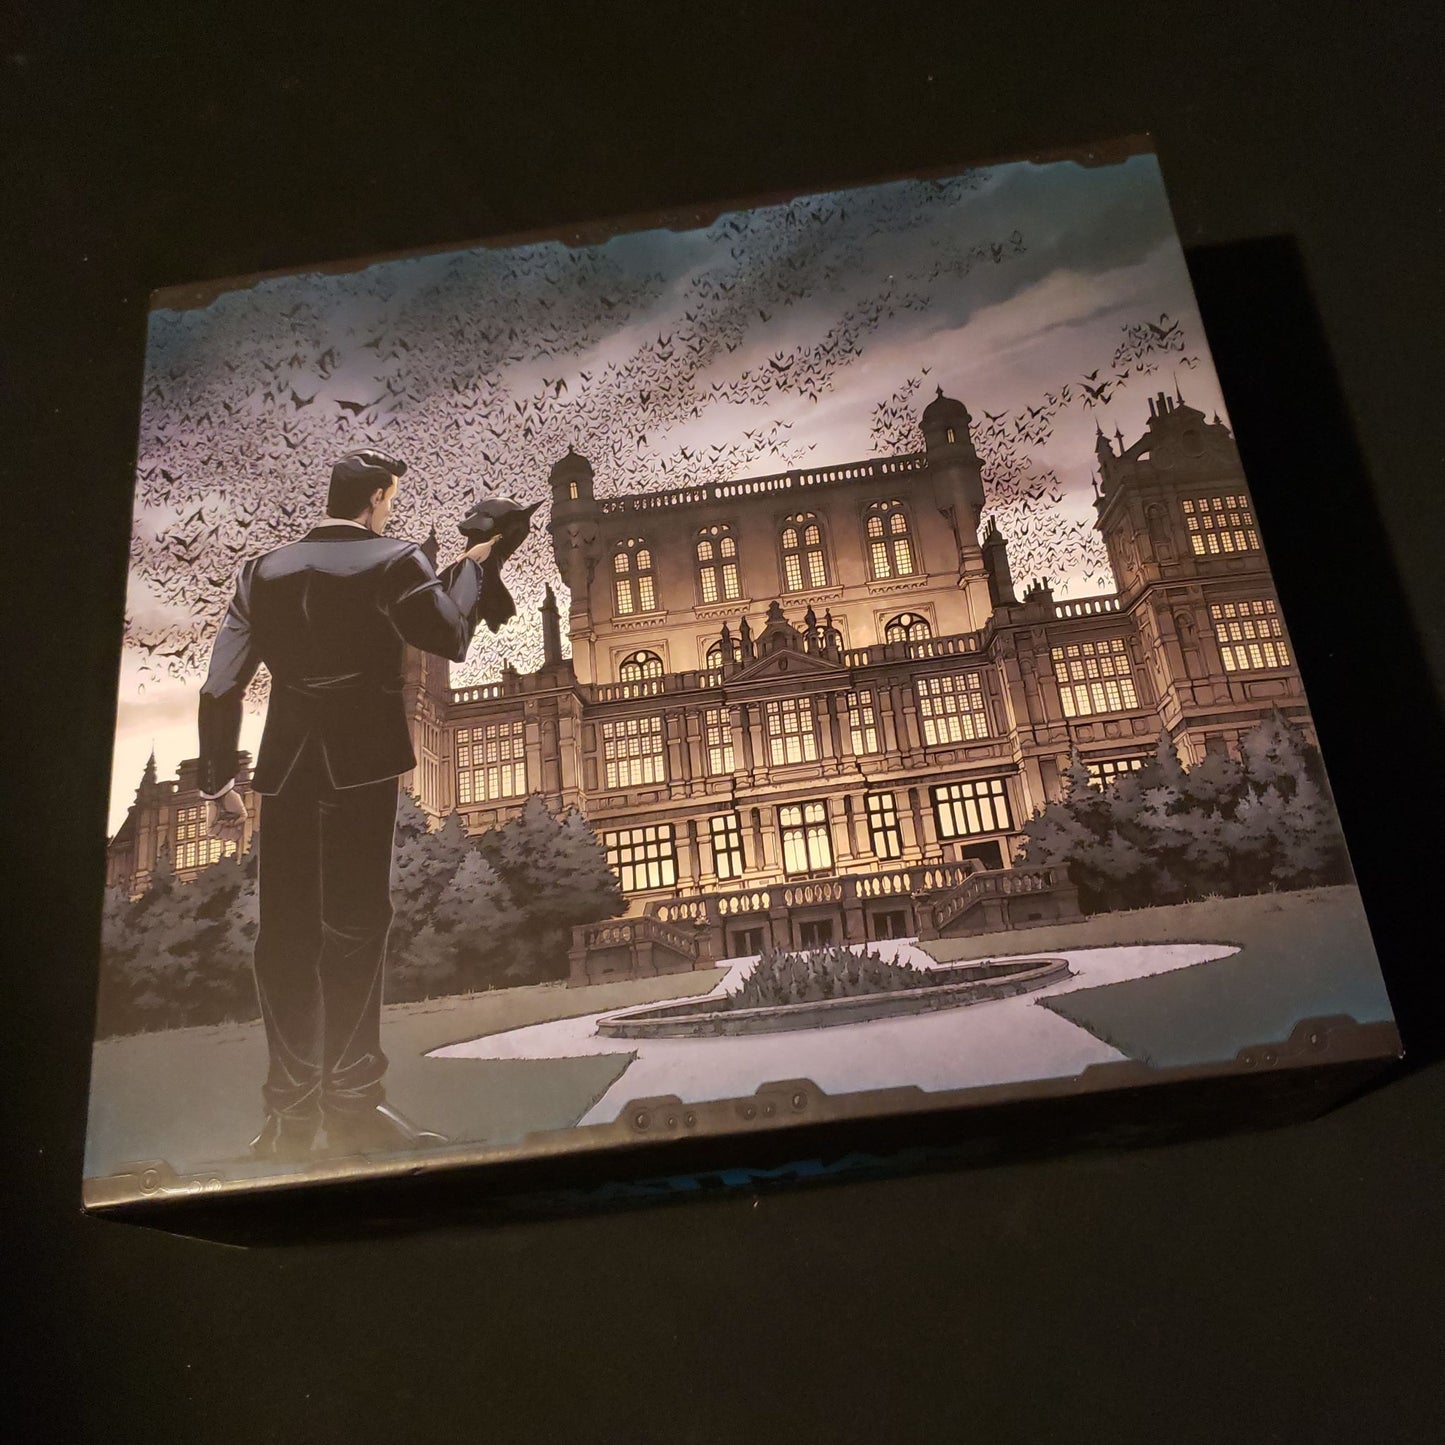 Image shows the front of the box for the Wayne Manor expansion for the Batman: Gotham City Chronicles board game